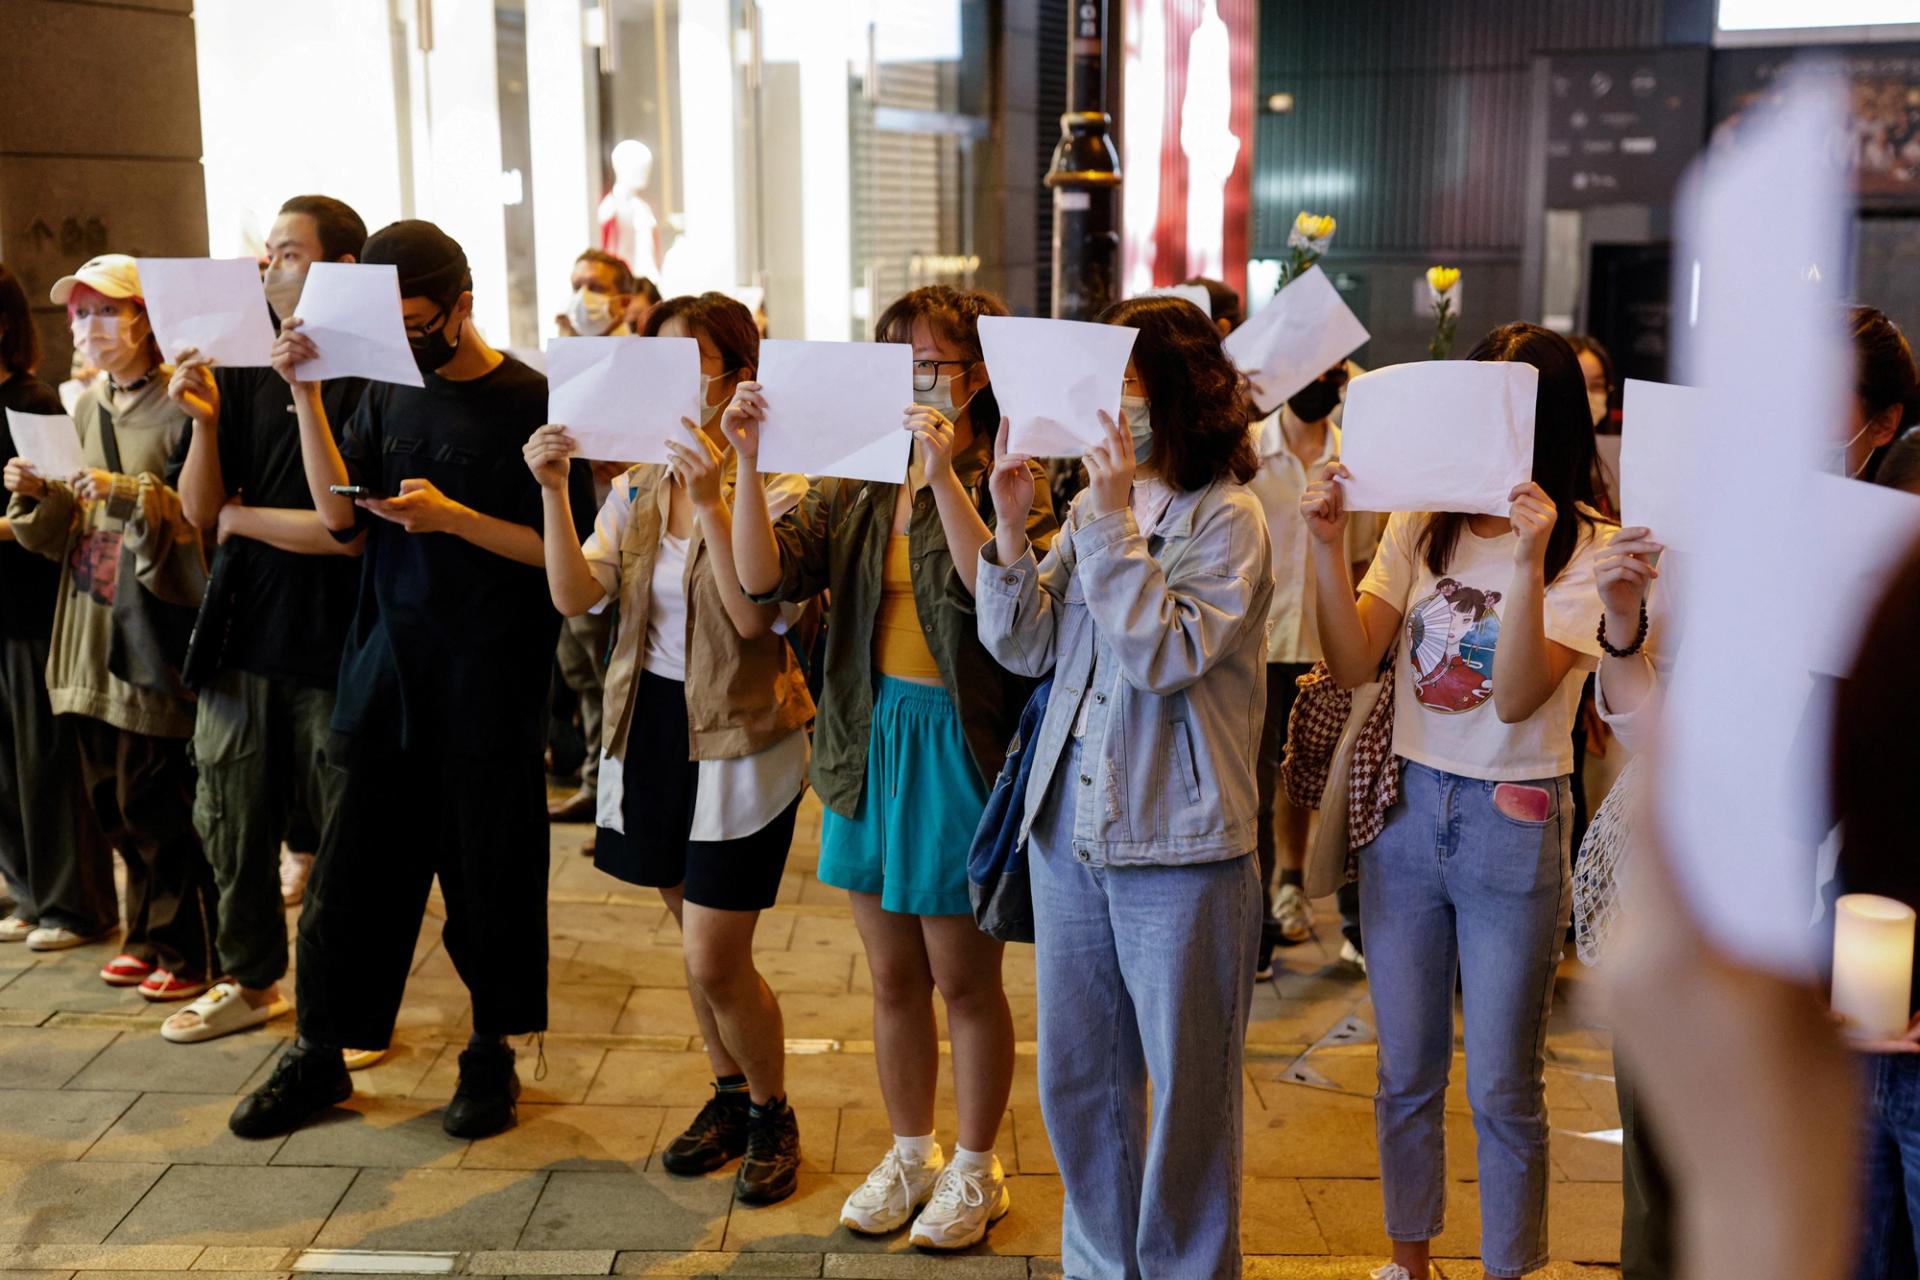 People hold sheets of paper in protest over coronavirus disease (COVID-19) restrictions in mainland China, during a commemoration of the victims of a fire in Urumqi